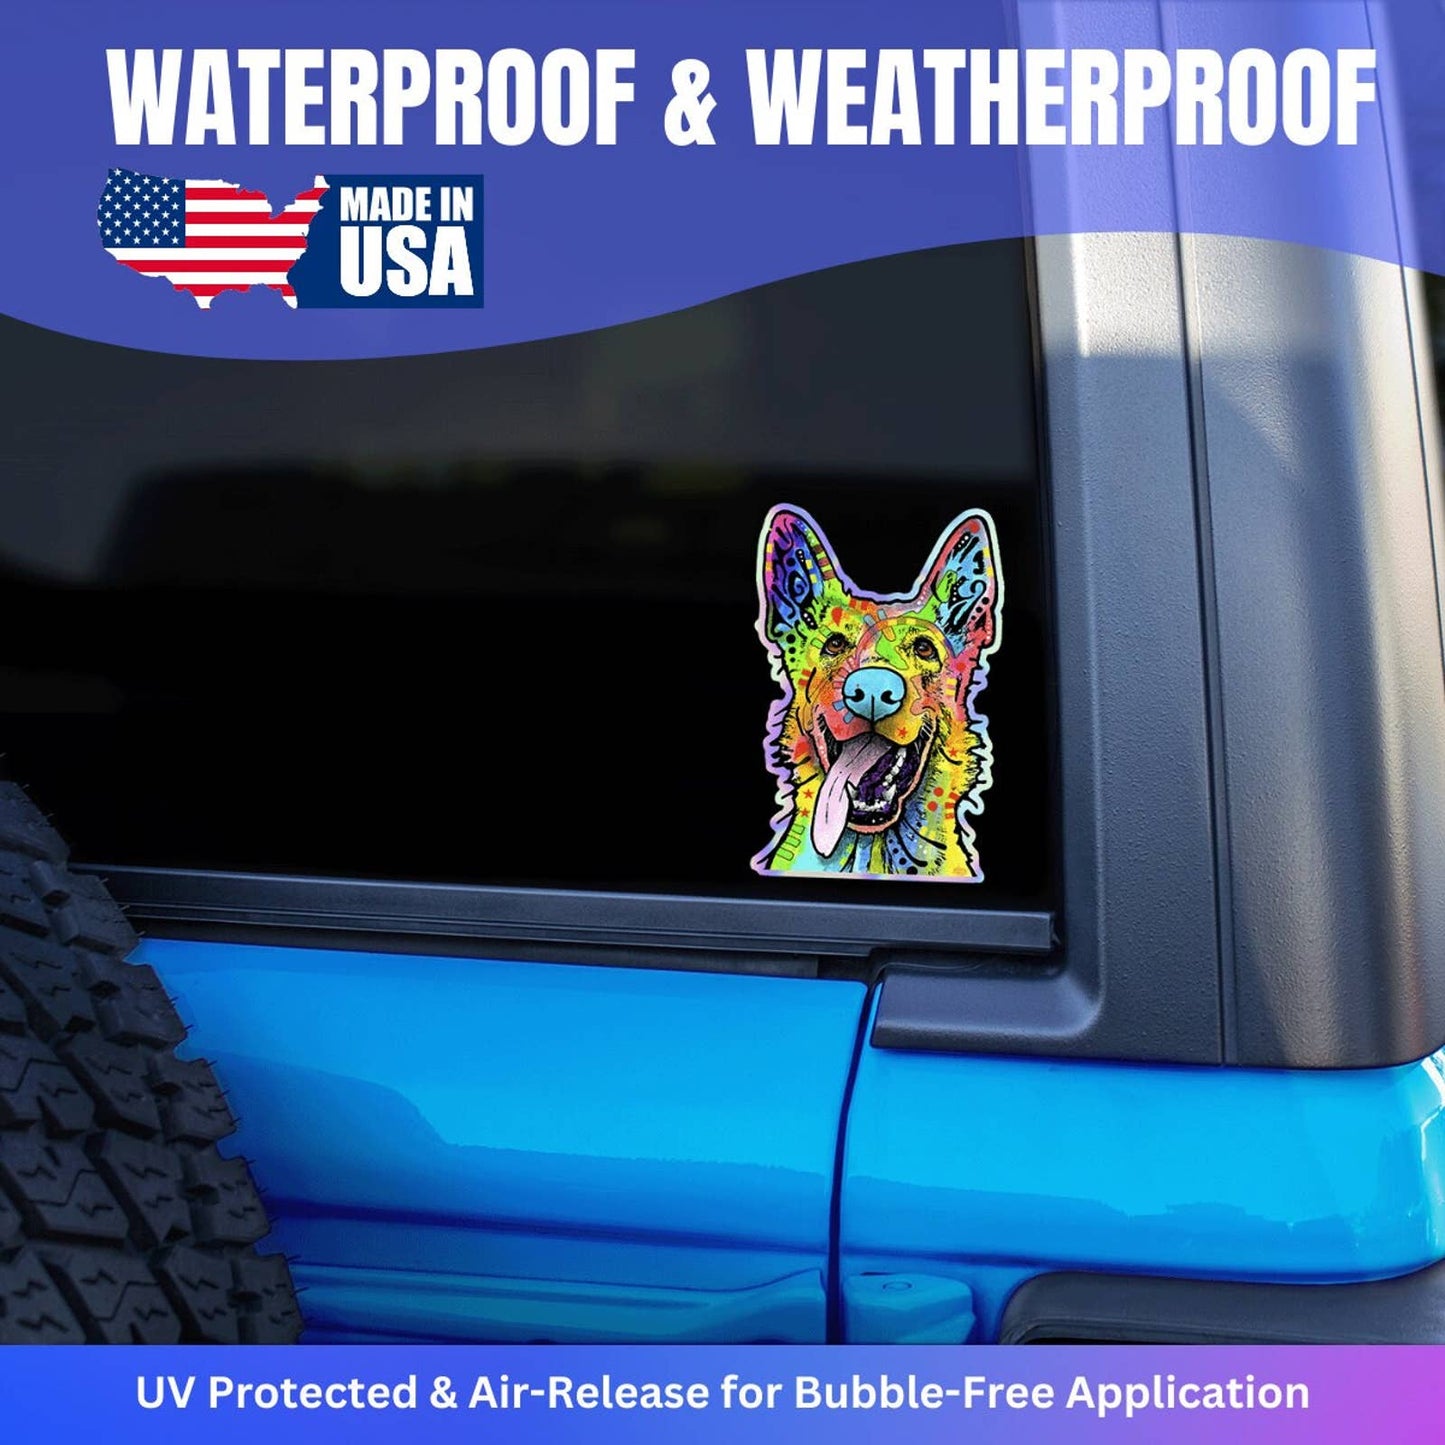 German Shepherd Sticker Holographic Officially Licensed Dean Russo German Shepherd Stickers Waterproof Stickers German Shepherd Decal